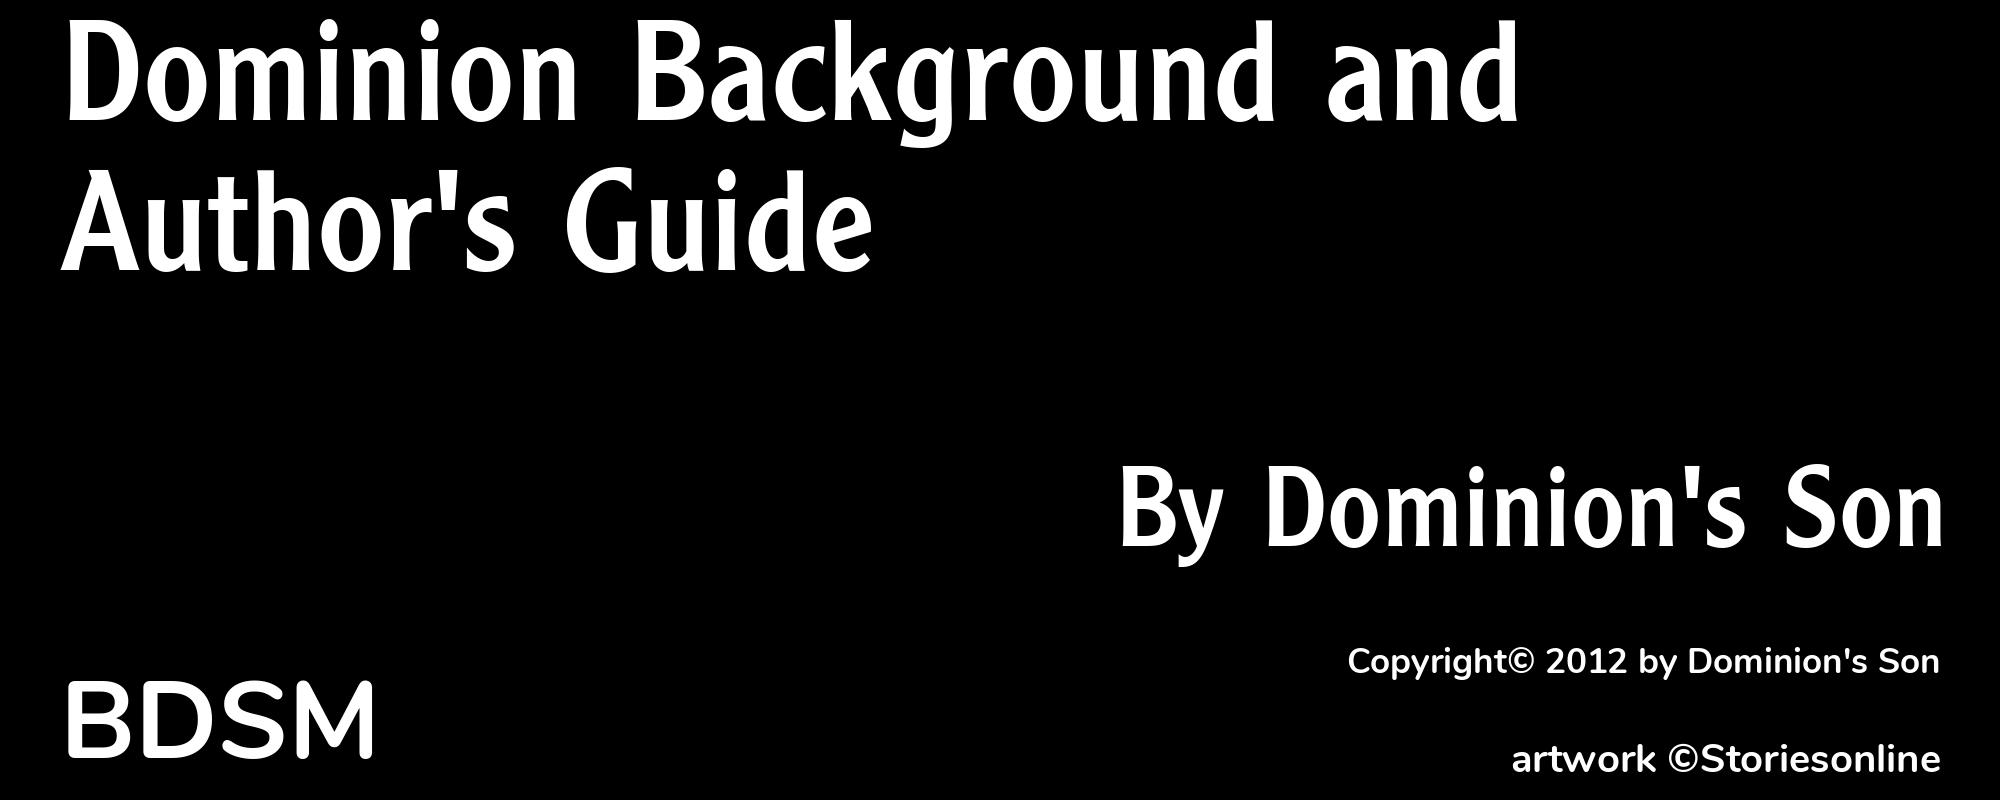 Dominion Background and Author's Guide - Cover